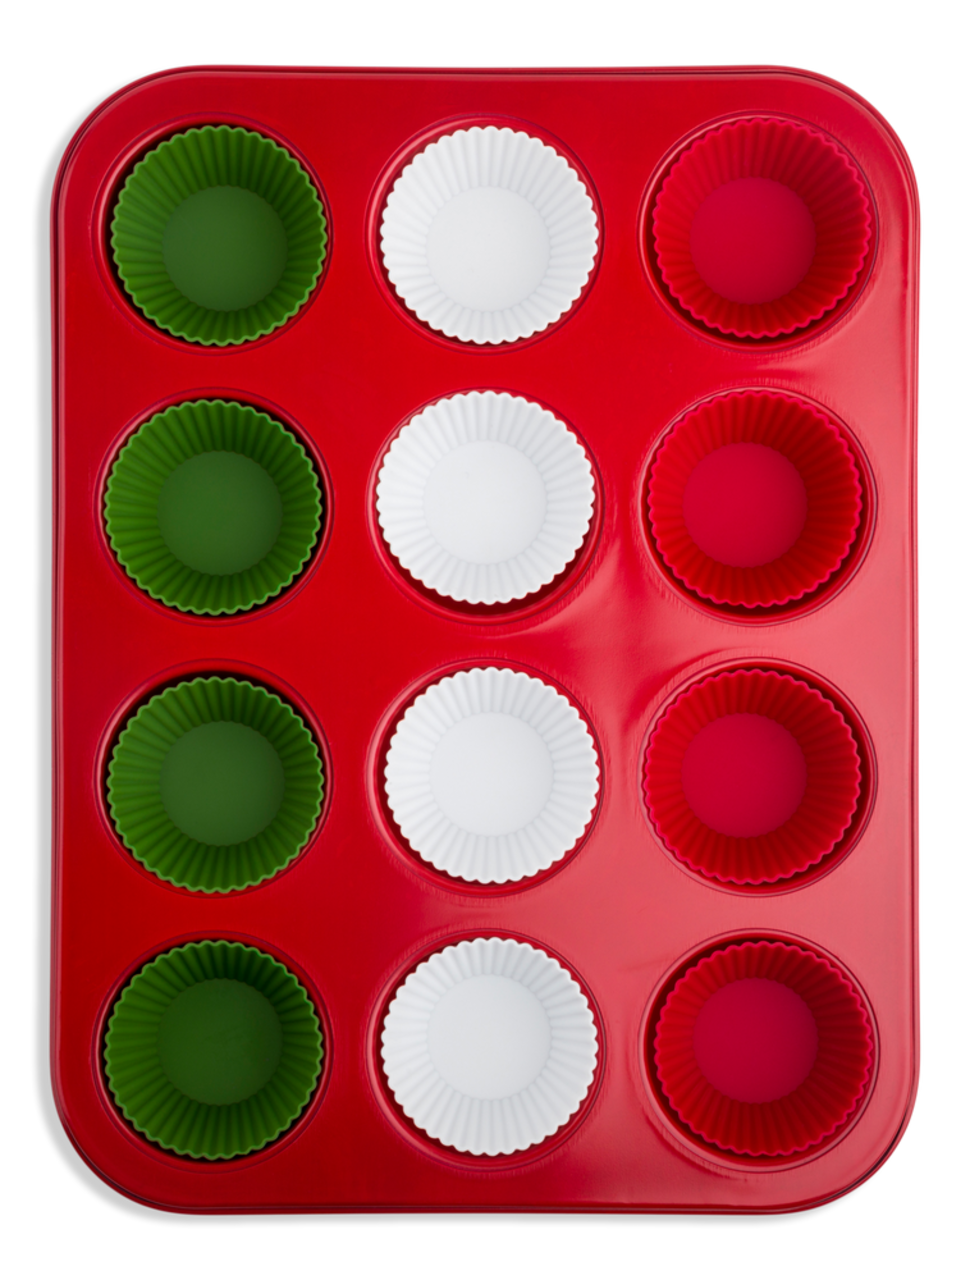 Core Home Muffin Pan Set with Silicone Cups, Red, 13-pc